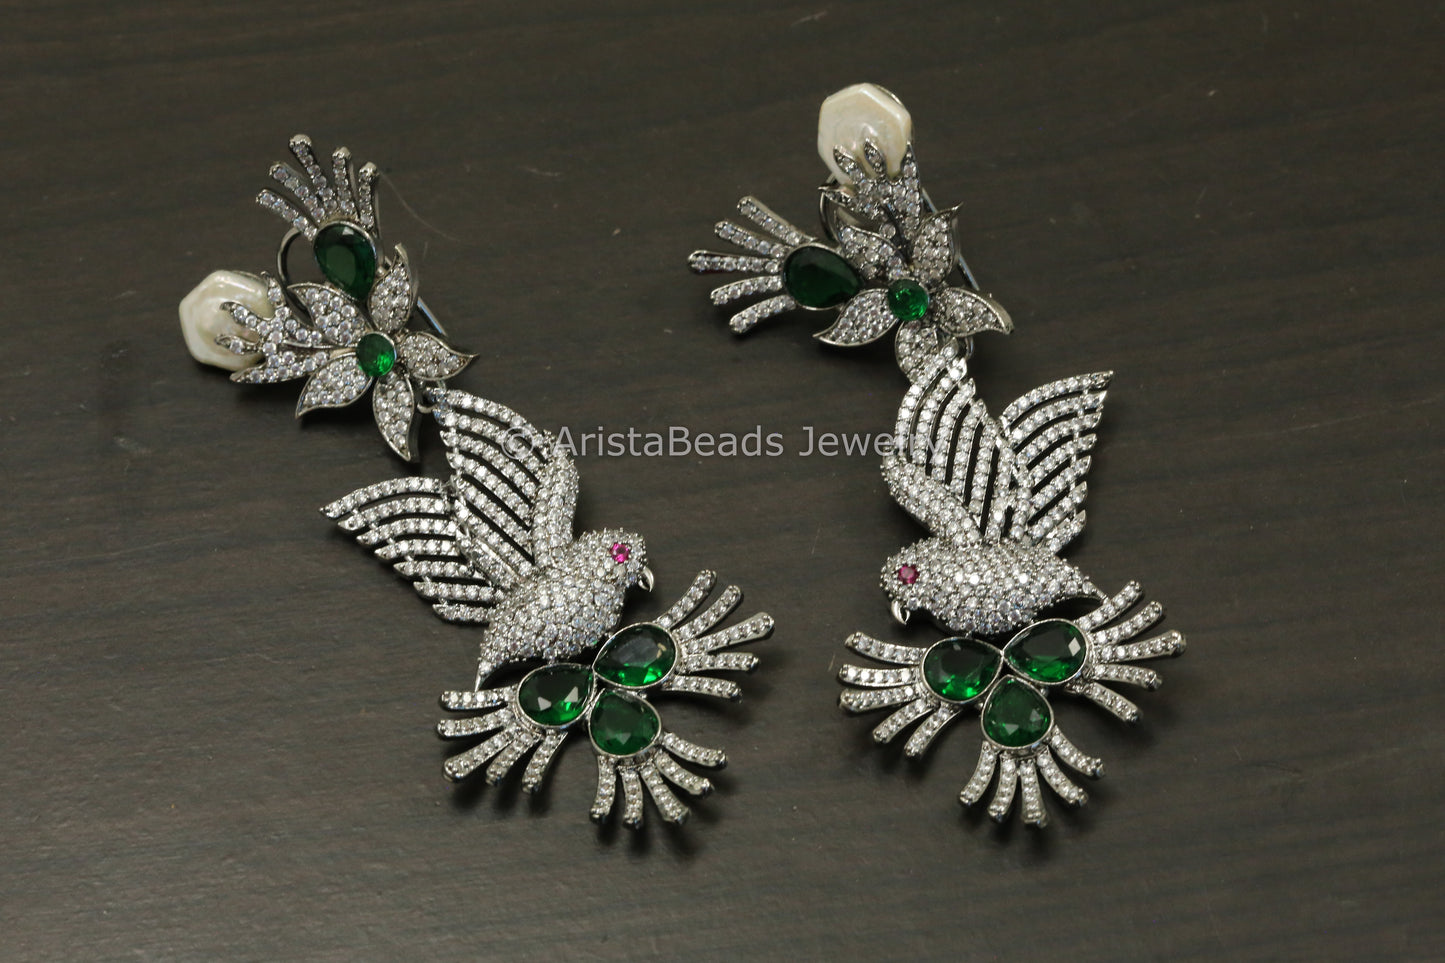 Large Victorian CZ & Baroque Pearl Earrings- Green